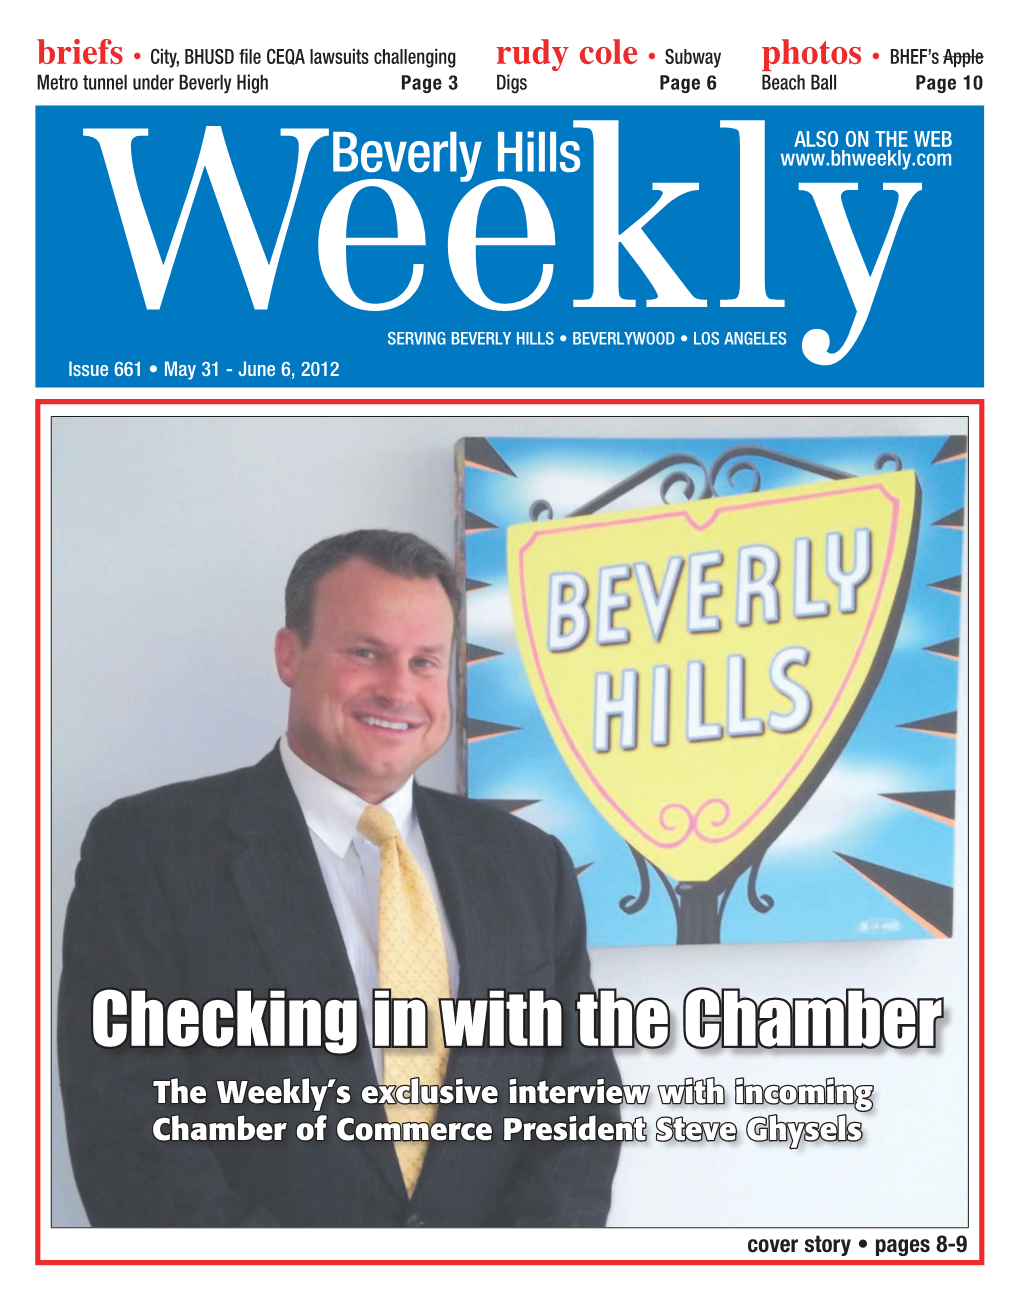 Checking in with the Chamber the Weekly’S Exclusive Interview with Incoming Chamber of Commerce President Steve Ghysels